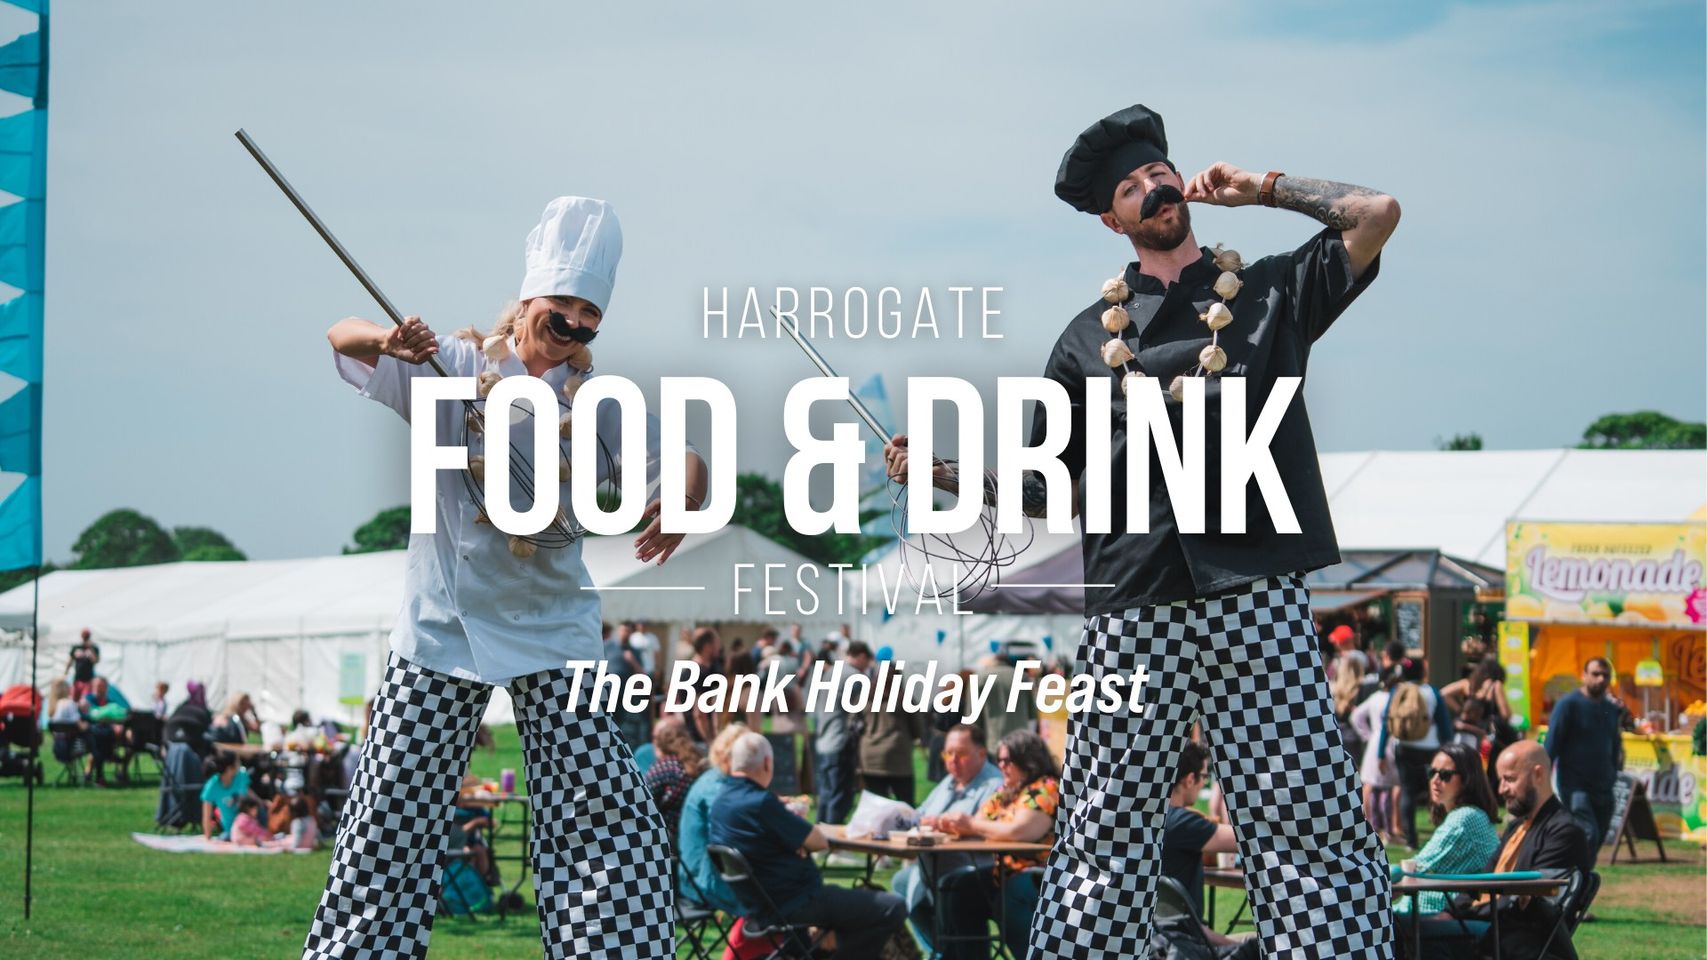 Image name FB Banner Riverside Food Festival the 14 image from the post Harrogate Food & Drink Festival 2024: A Bank Holiday Feast in Yorkshire.com.